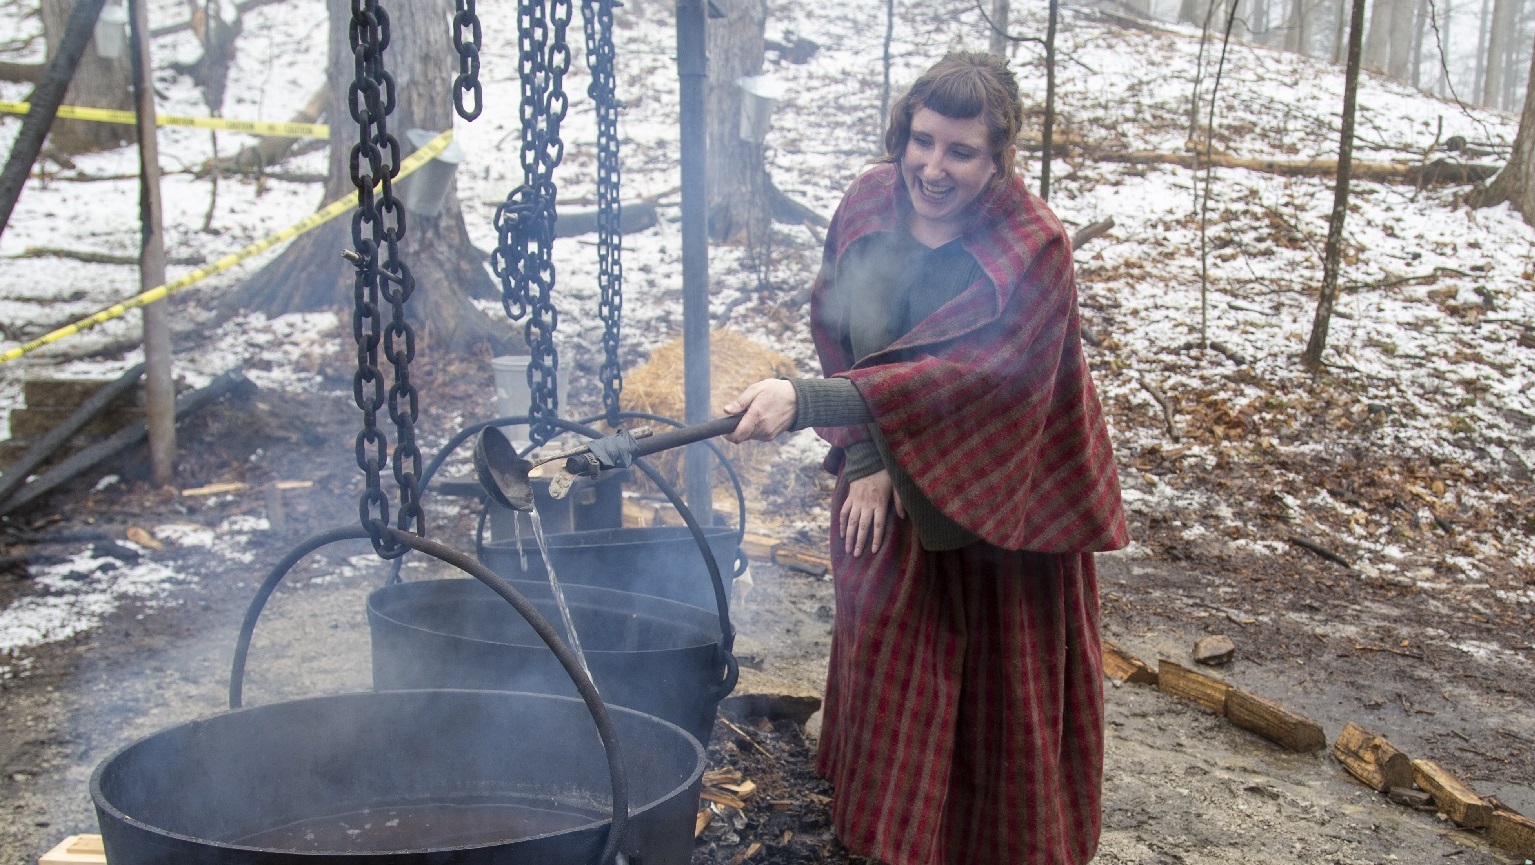 educator at Kortright Centre for Conservation demonstrates traditional method of making maple syrup